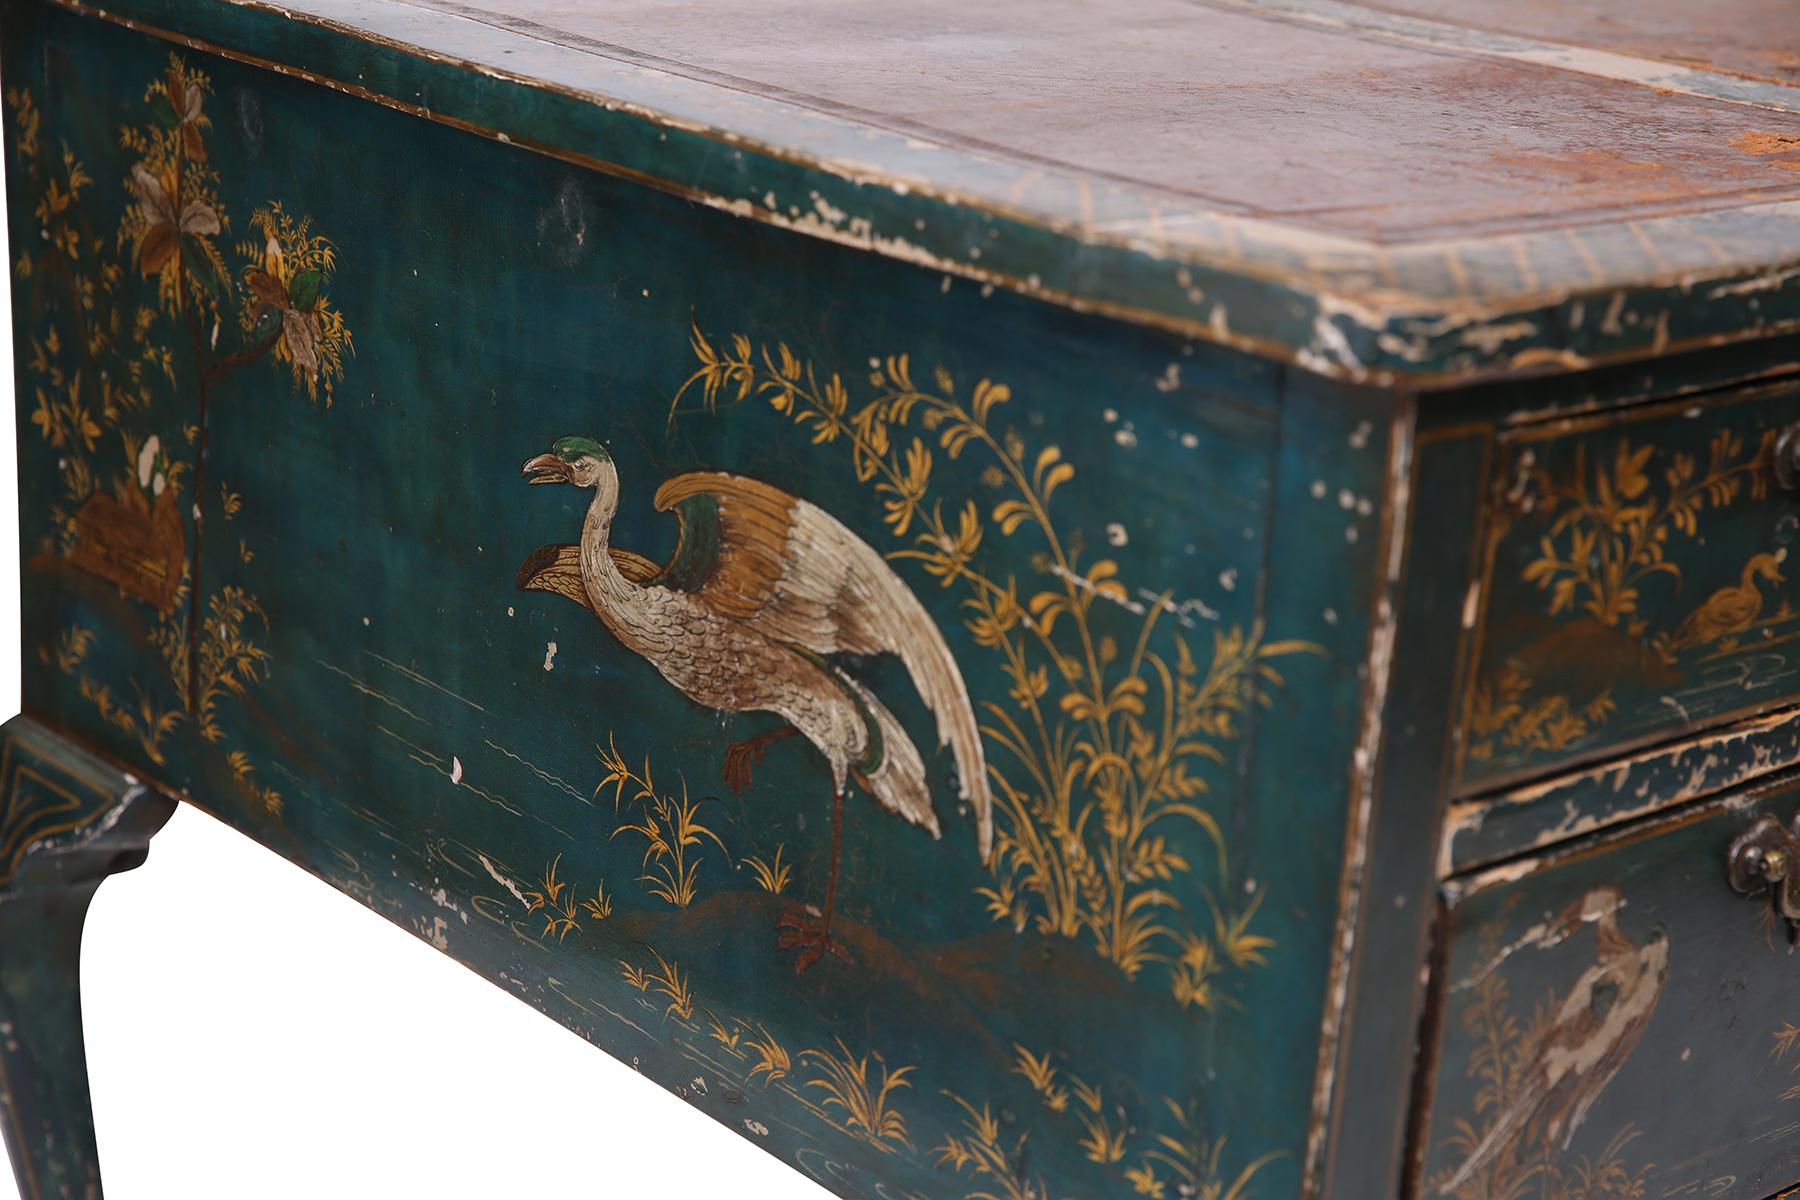 20th Century Green Turn-of-the-Century Patinated Desk